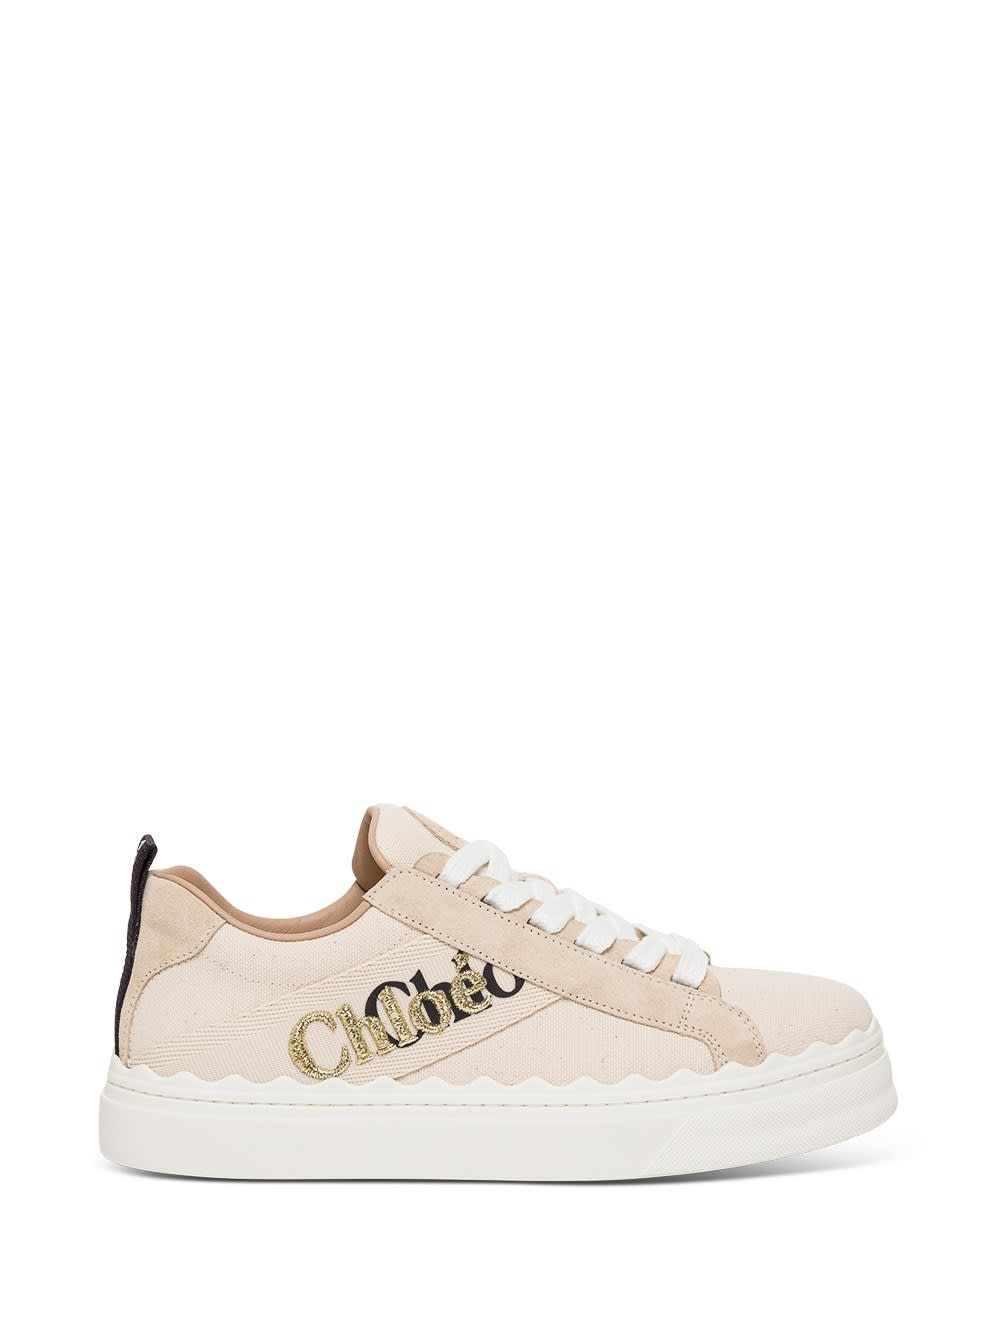 Chloé Embroidered Canvas Sneakers Laurent